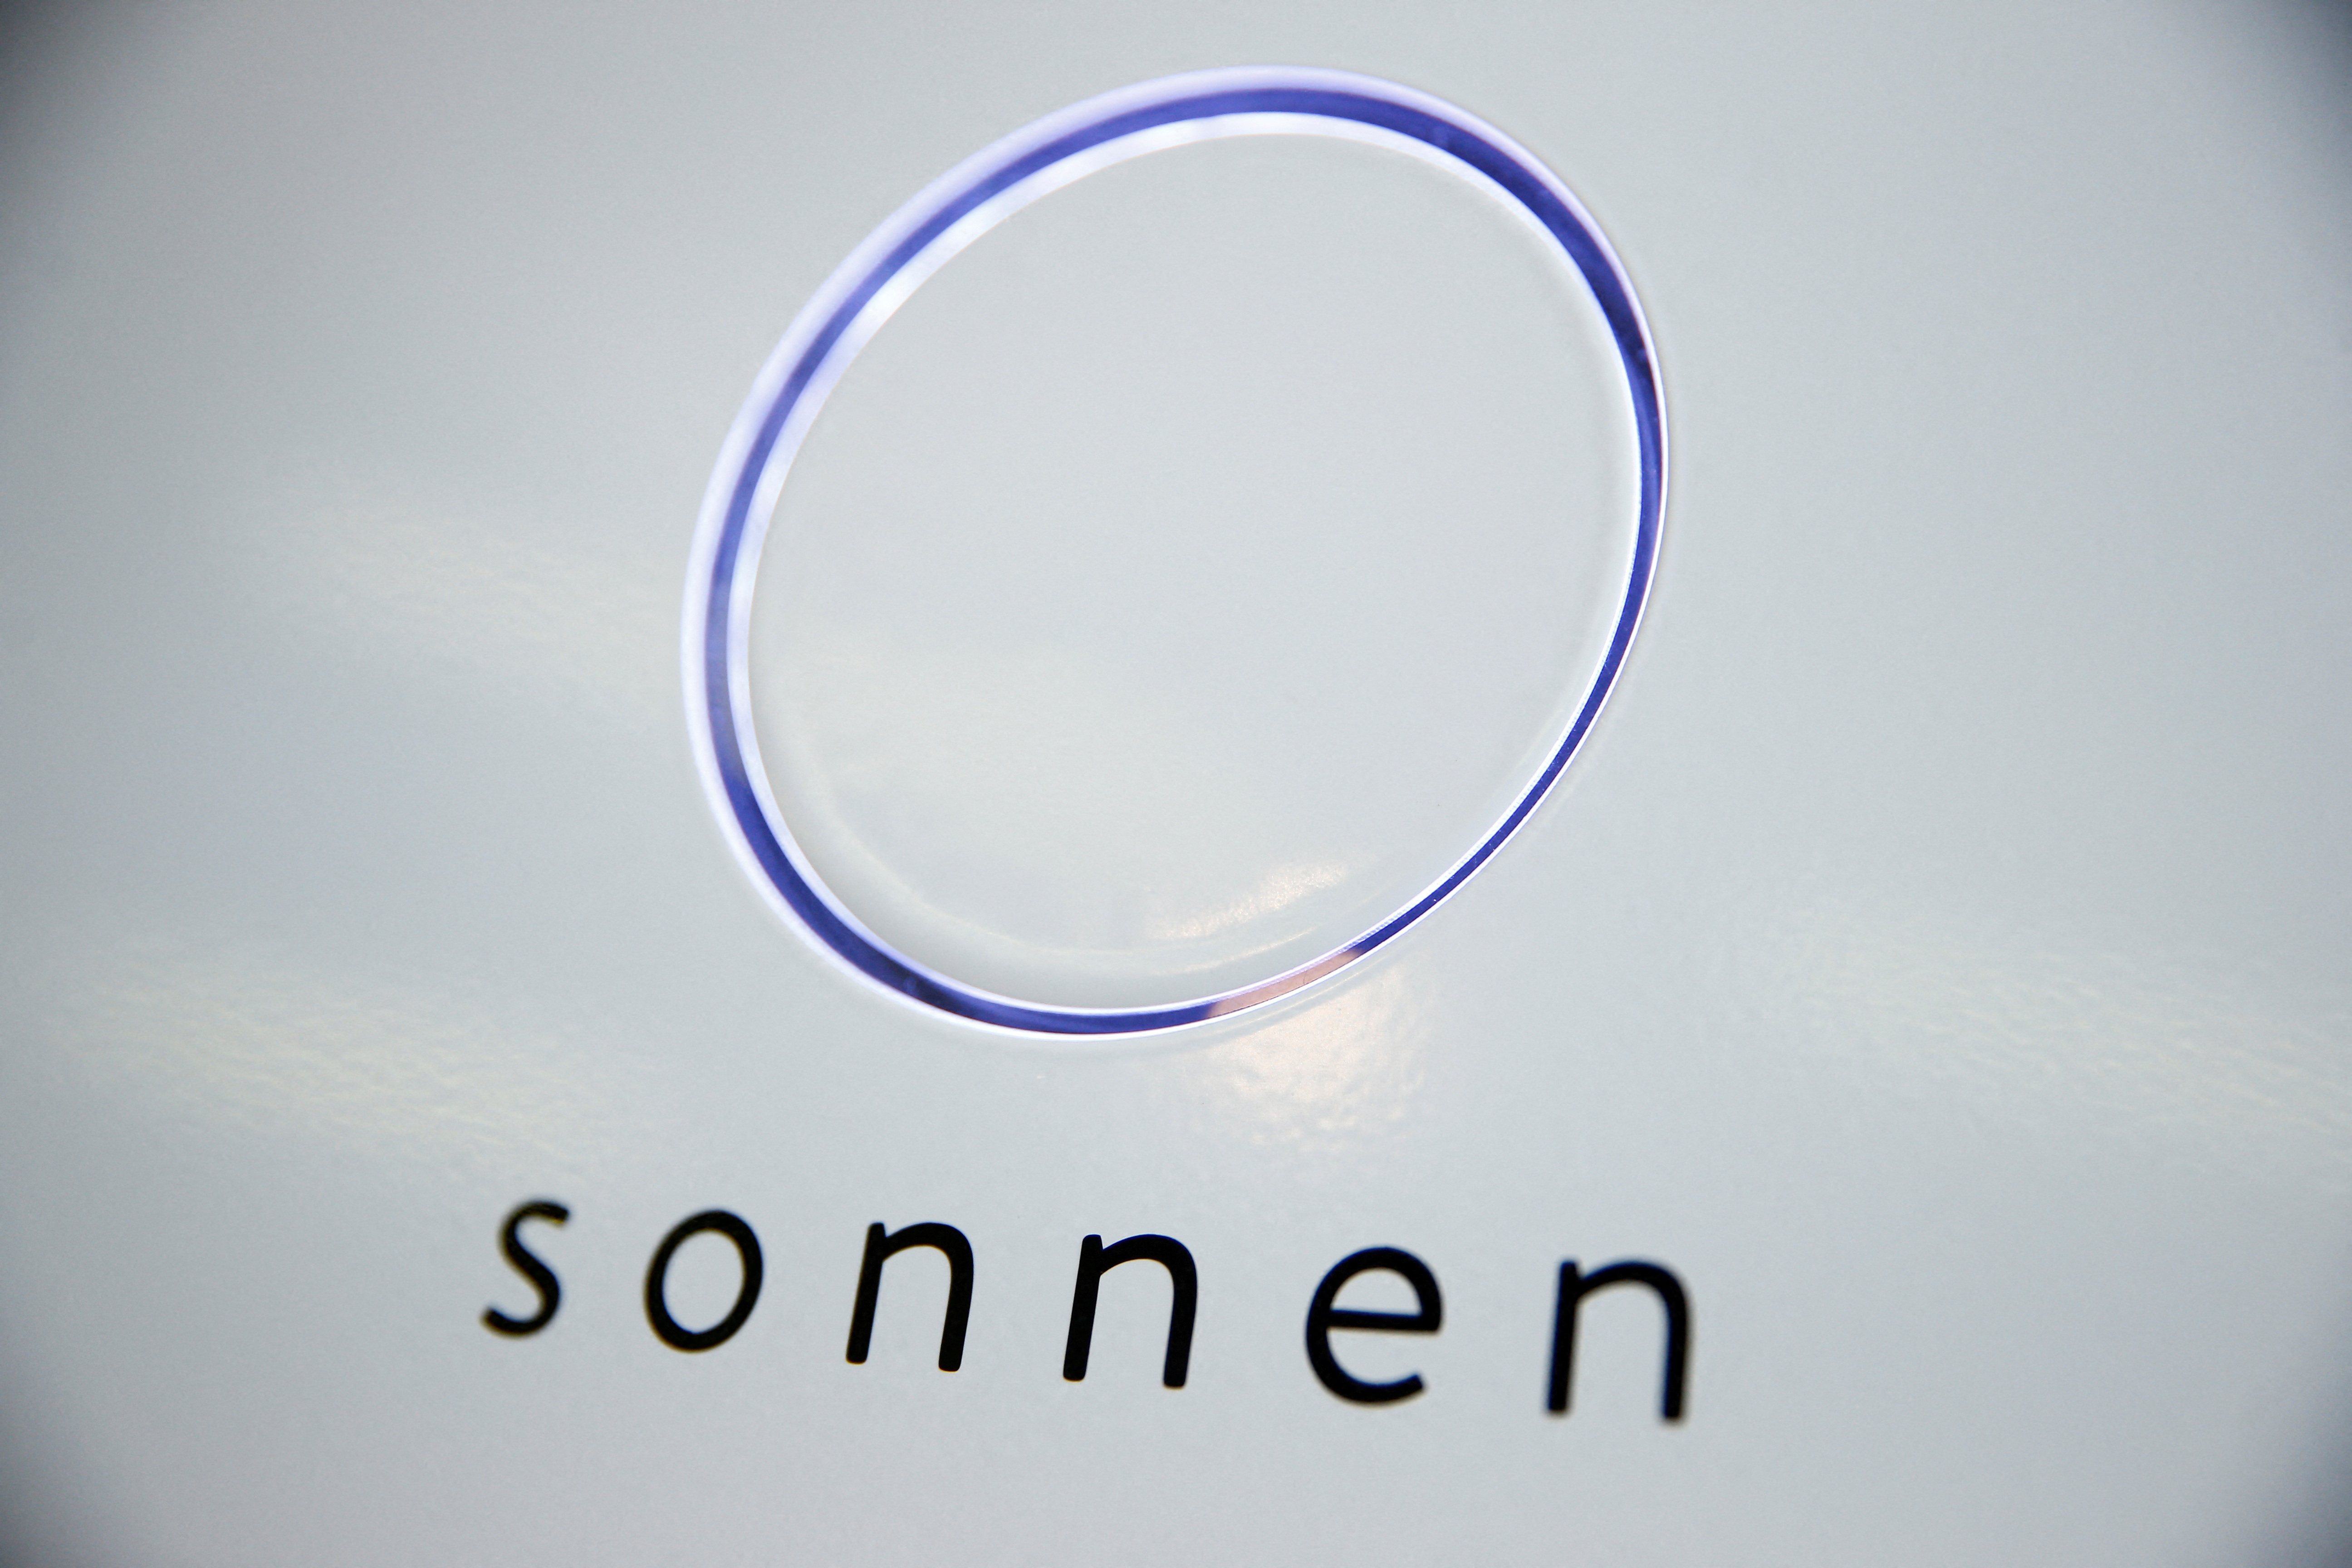 A lithium battery unit of the startup "sonnen", formerly known as Sonnenbatterie, is seen in Berlin